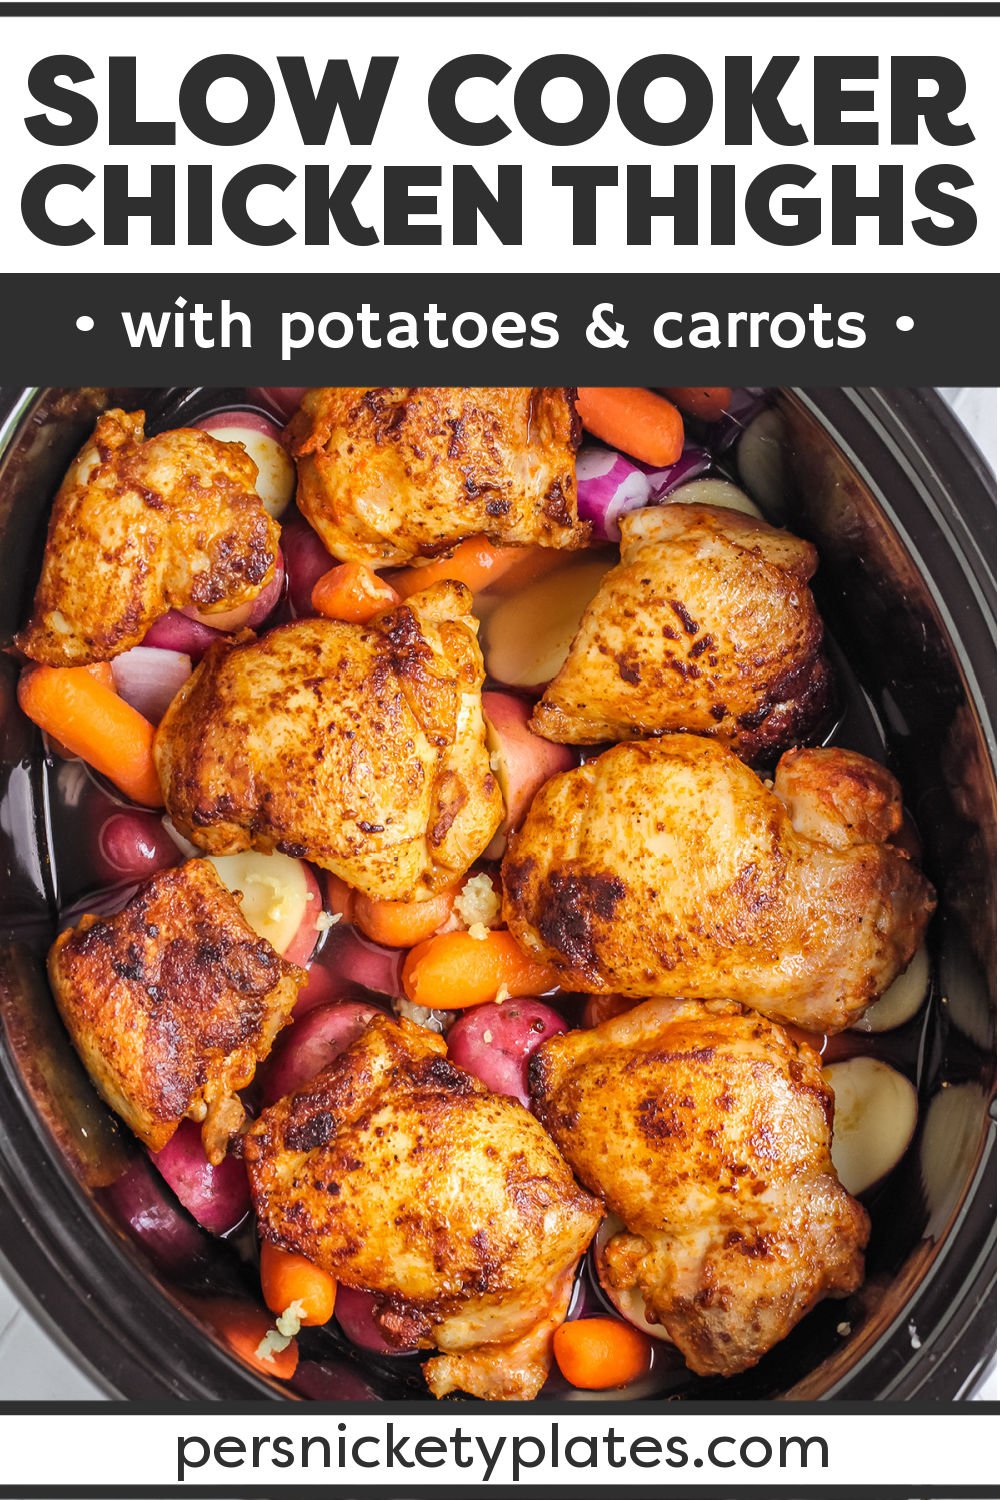 Slow Cooker Chicken Thighs with Potatoes & Carrots is an easy recipe that makes your entire dinner right in the crockpot! Juicy chicken thighs, tender potatoes and carrots, and a flavorful chicken gravy to pour over the top make this a meal the whole family will love. | www.persnicketyplates.com